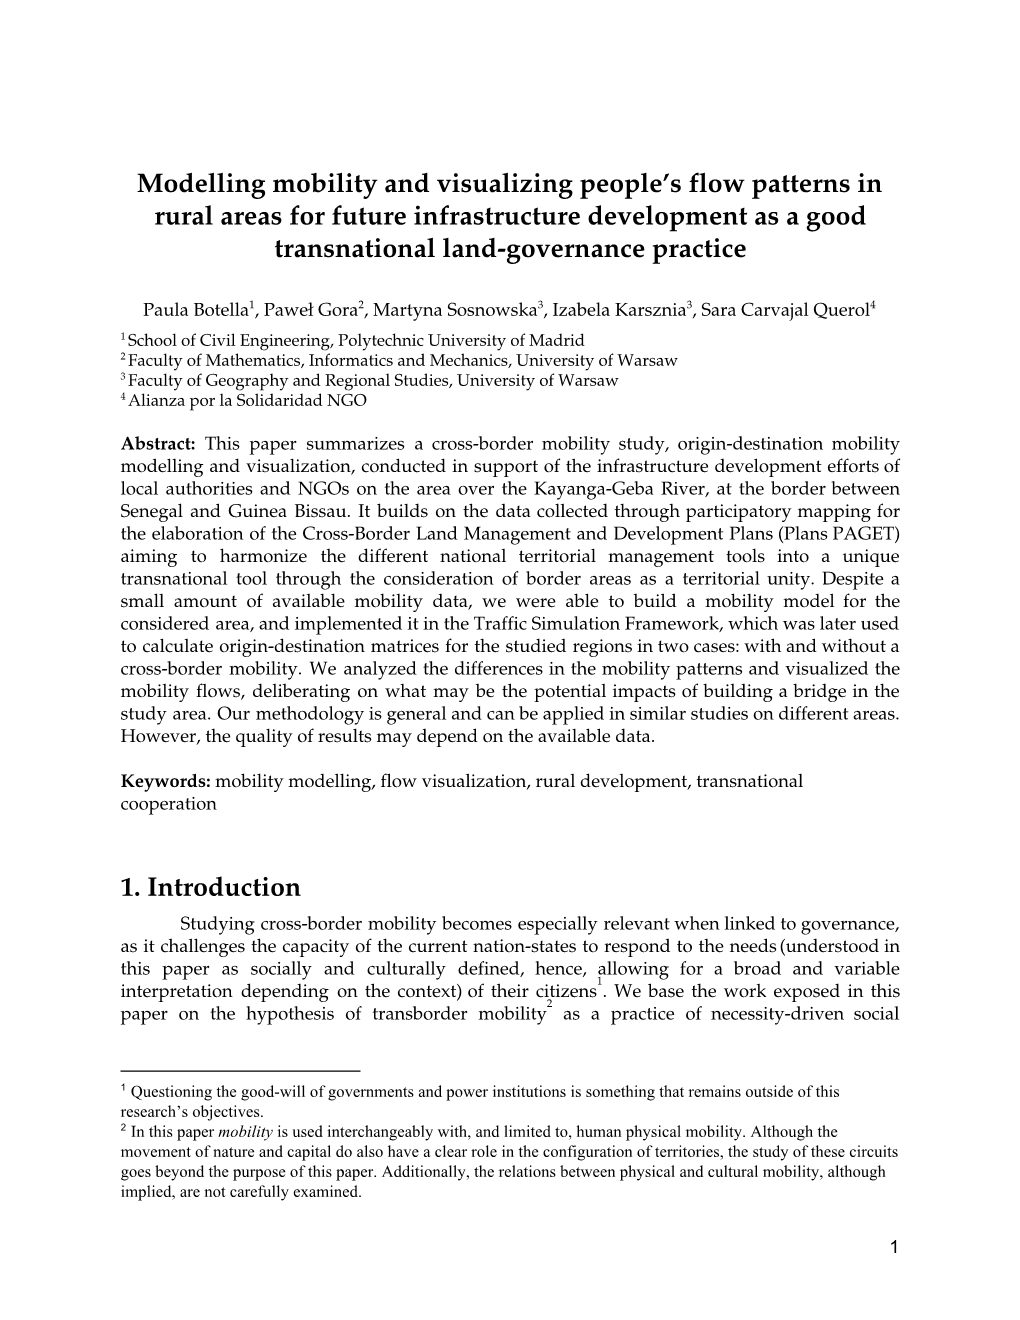 Modelling Mobility and Visualizing People's Flow Patterns in Rural Areas